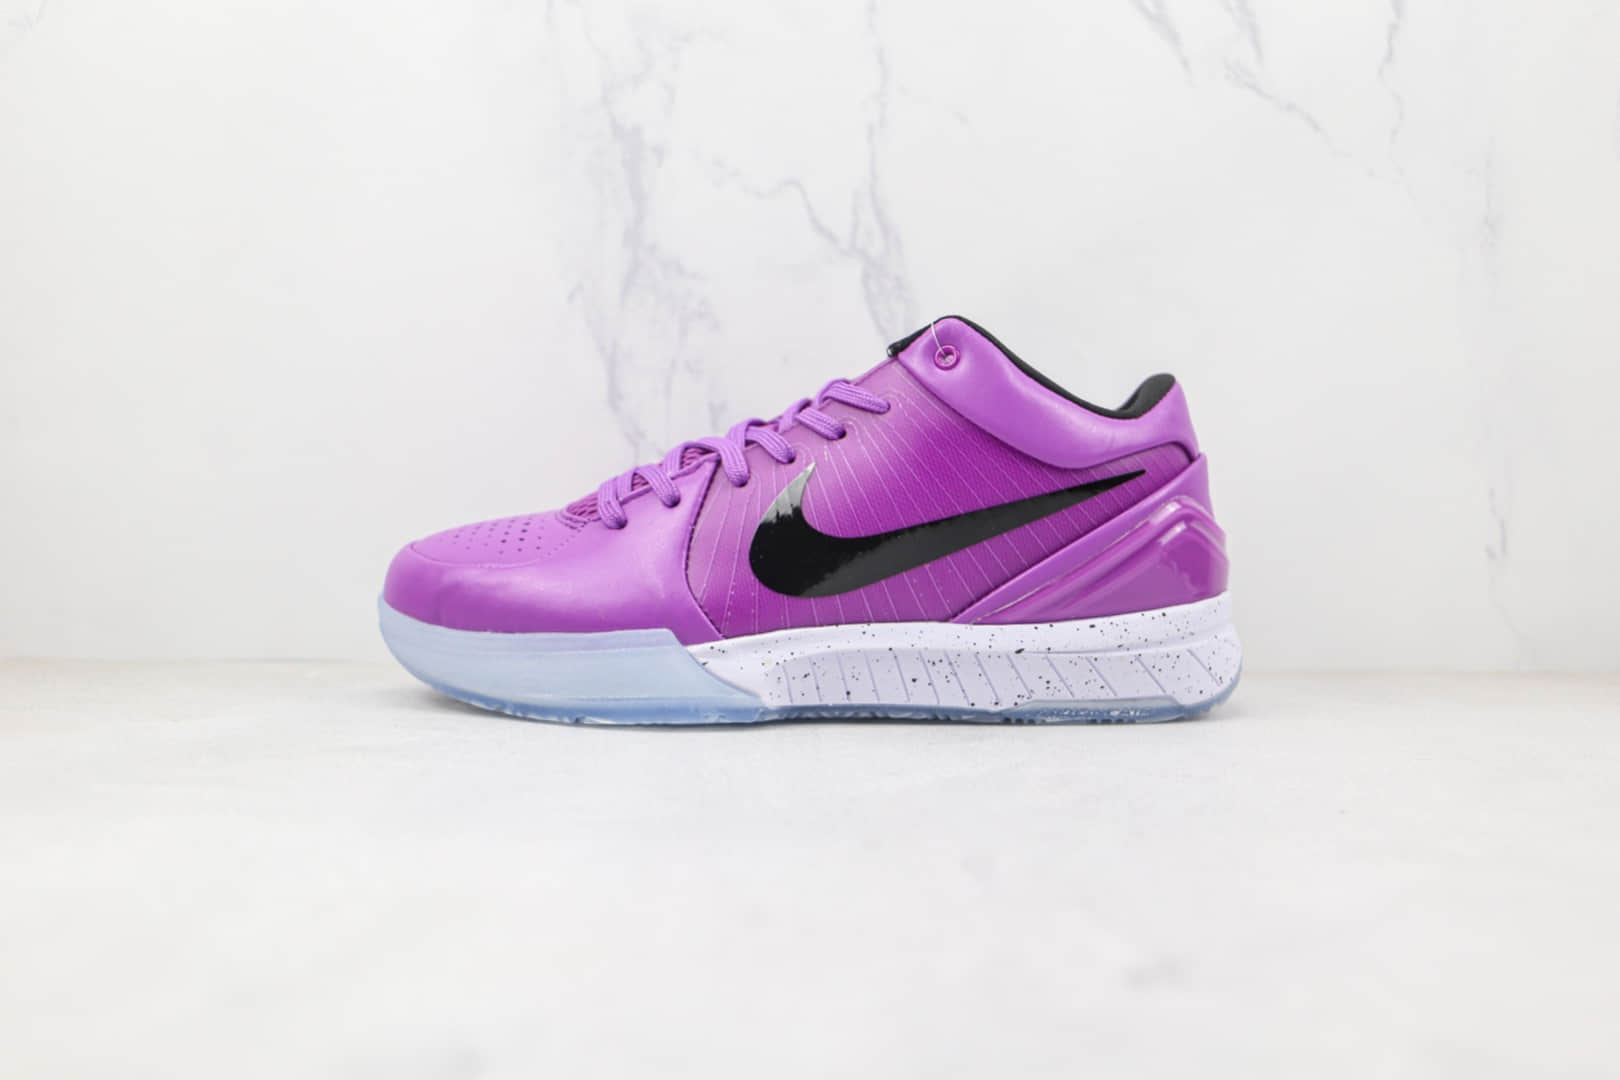 Nike Undefeated x Kobe 4 Protro 'Court Purple' CQ3869-500 - Unbeatable Style for the Court